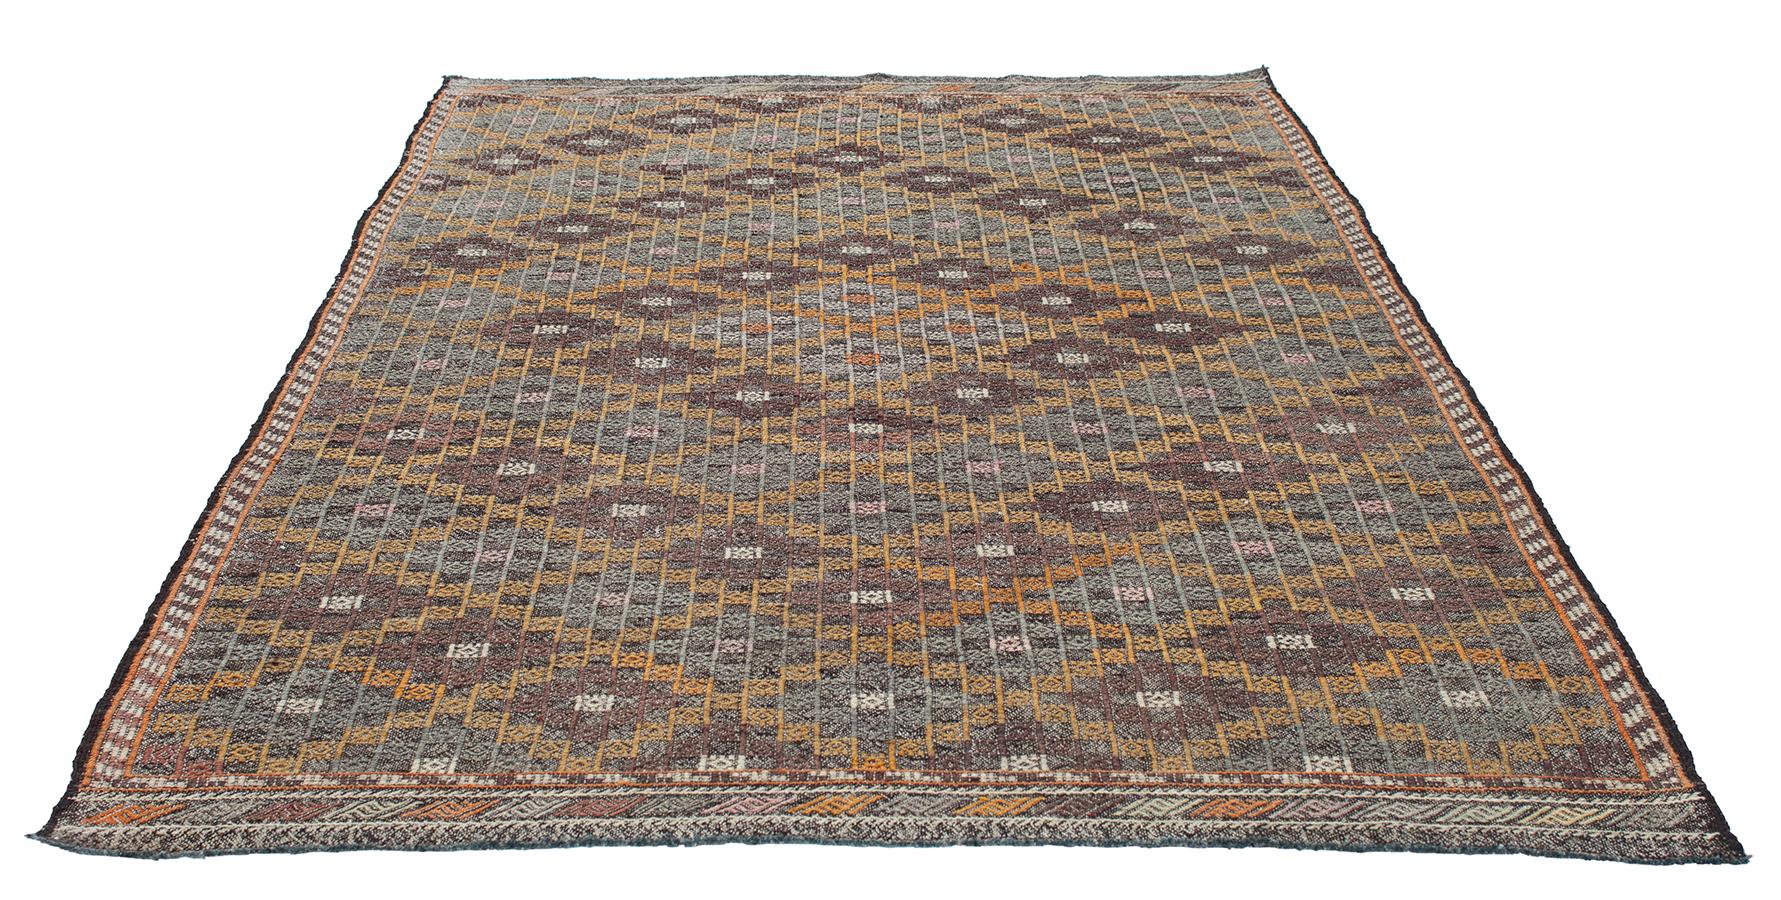 Hand-Woven Vintage Midcentury Tribal Flat-Weave Rug For Sale